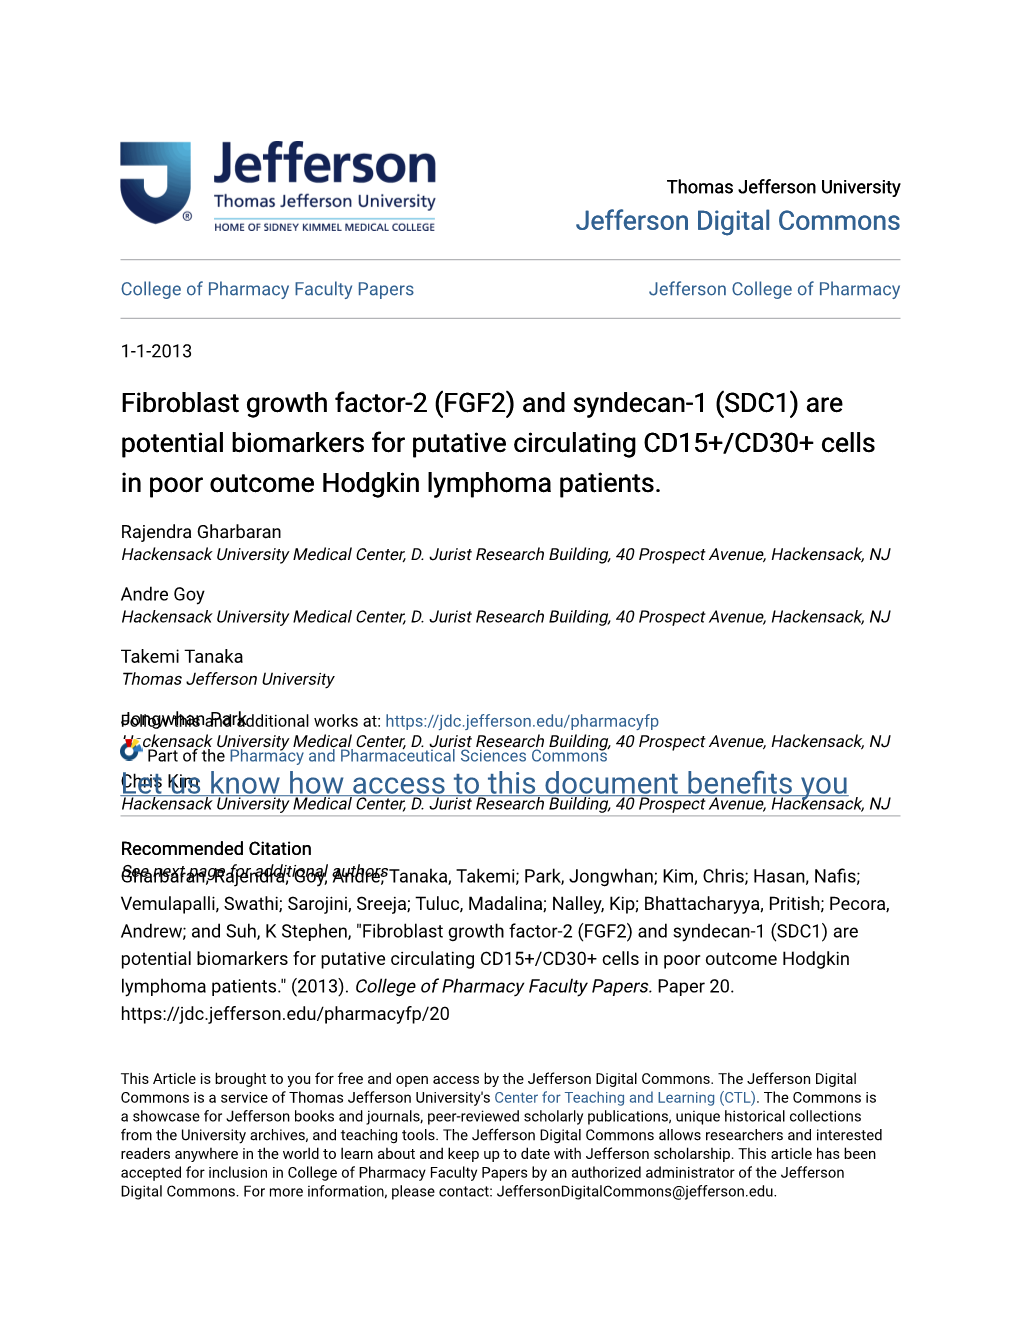 Fibroblast Growth Factor-2 (FGF2) and Syndecan-1 (SDC1) Are Potential Biomarkers for Putative Circulating CD15+/CD30+ Cells in Poor Outcome Hodgkin Lymphoma Patients